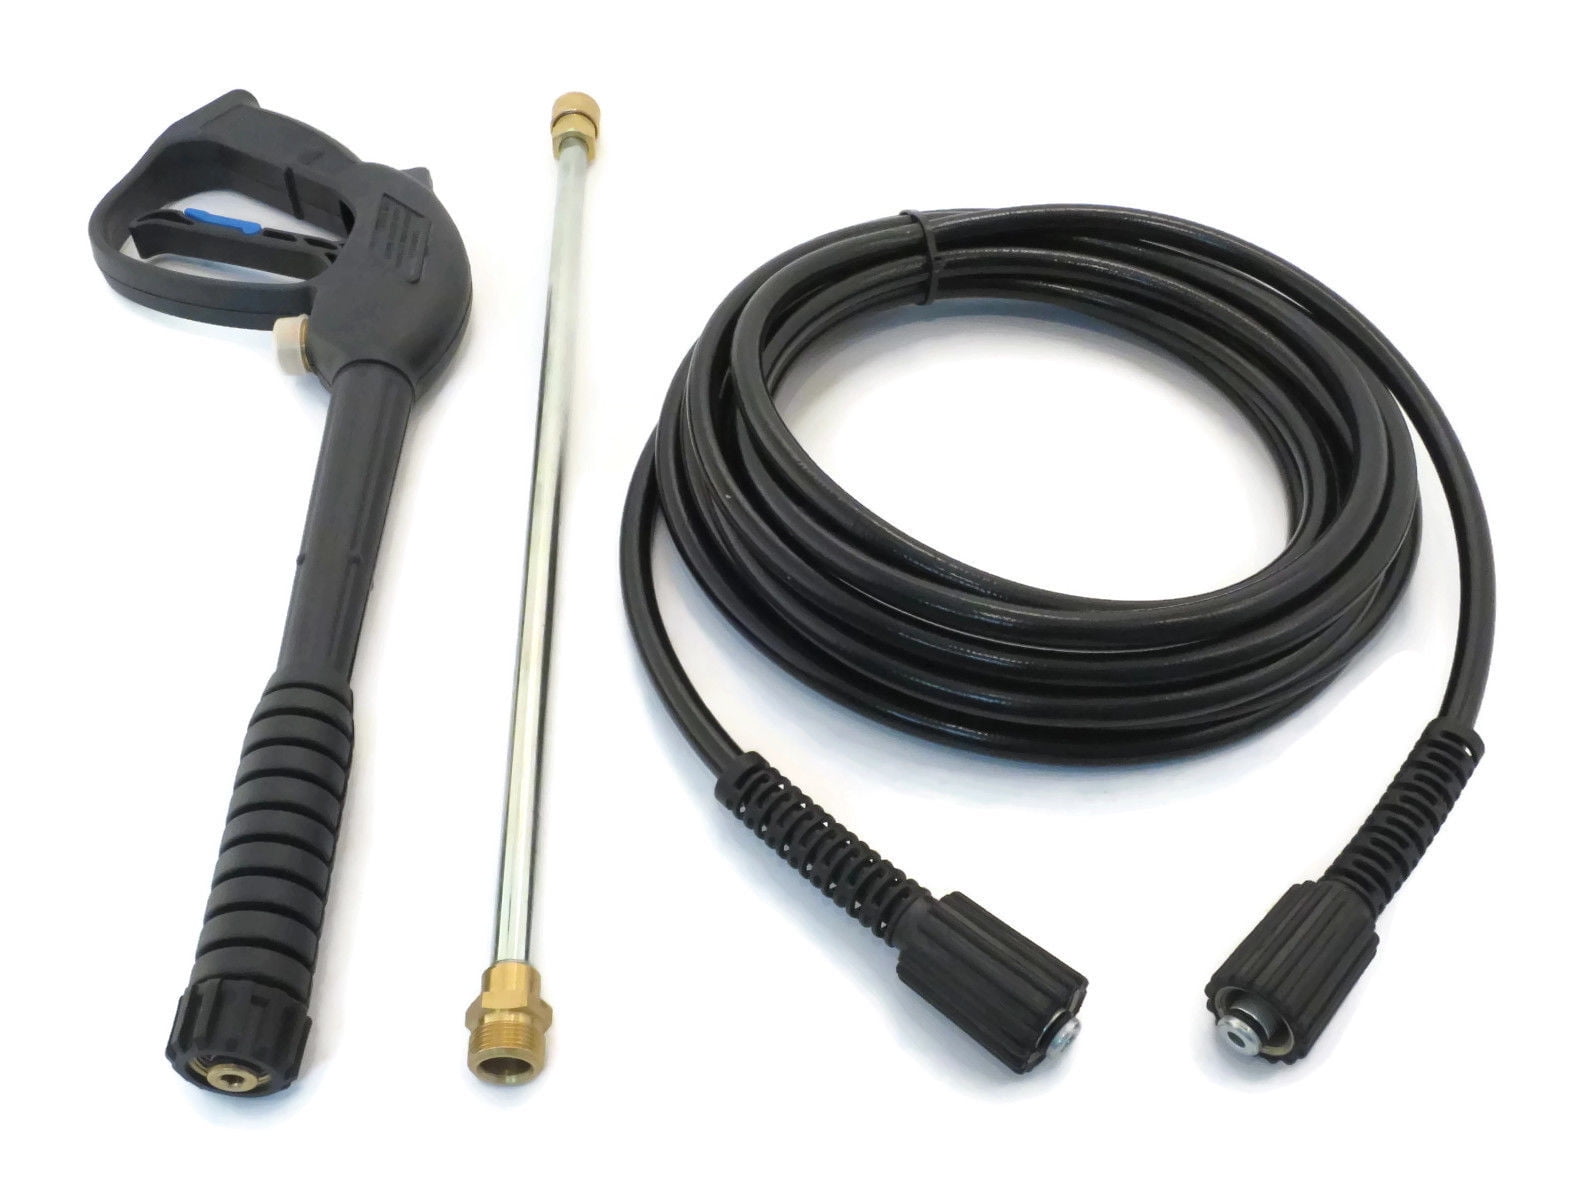 New 3100 PSI POWER PRESSURE WASHER PUMP & SPRAY KIT Campbell Hausfeld PW2055V2LE 